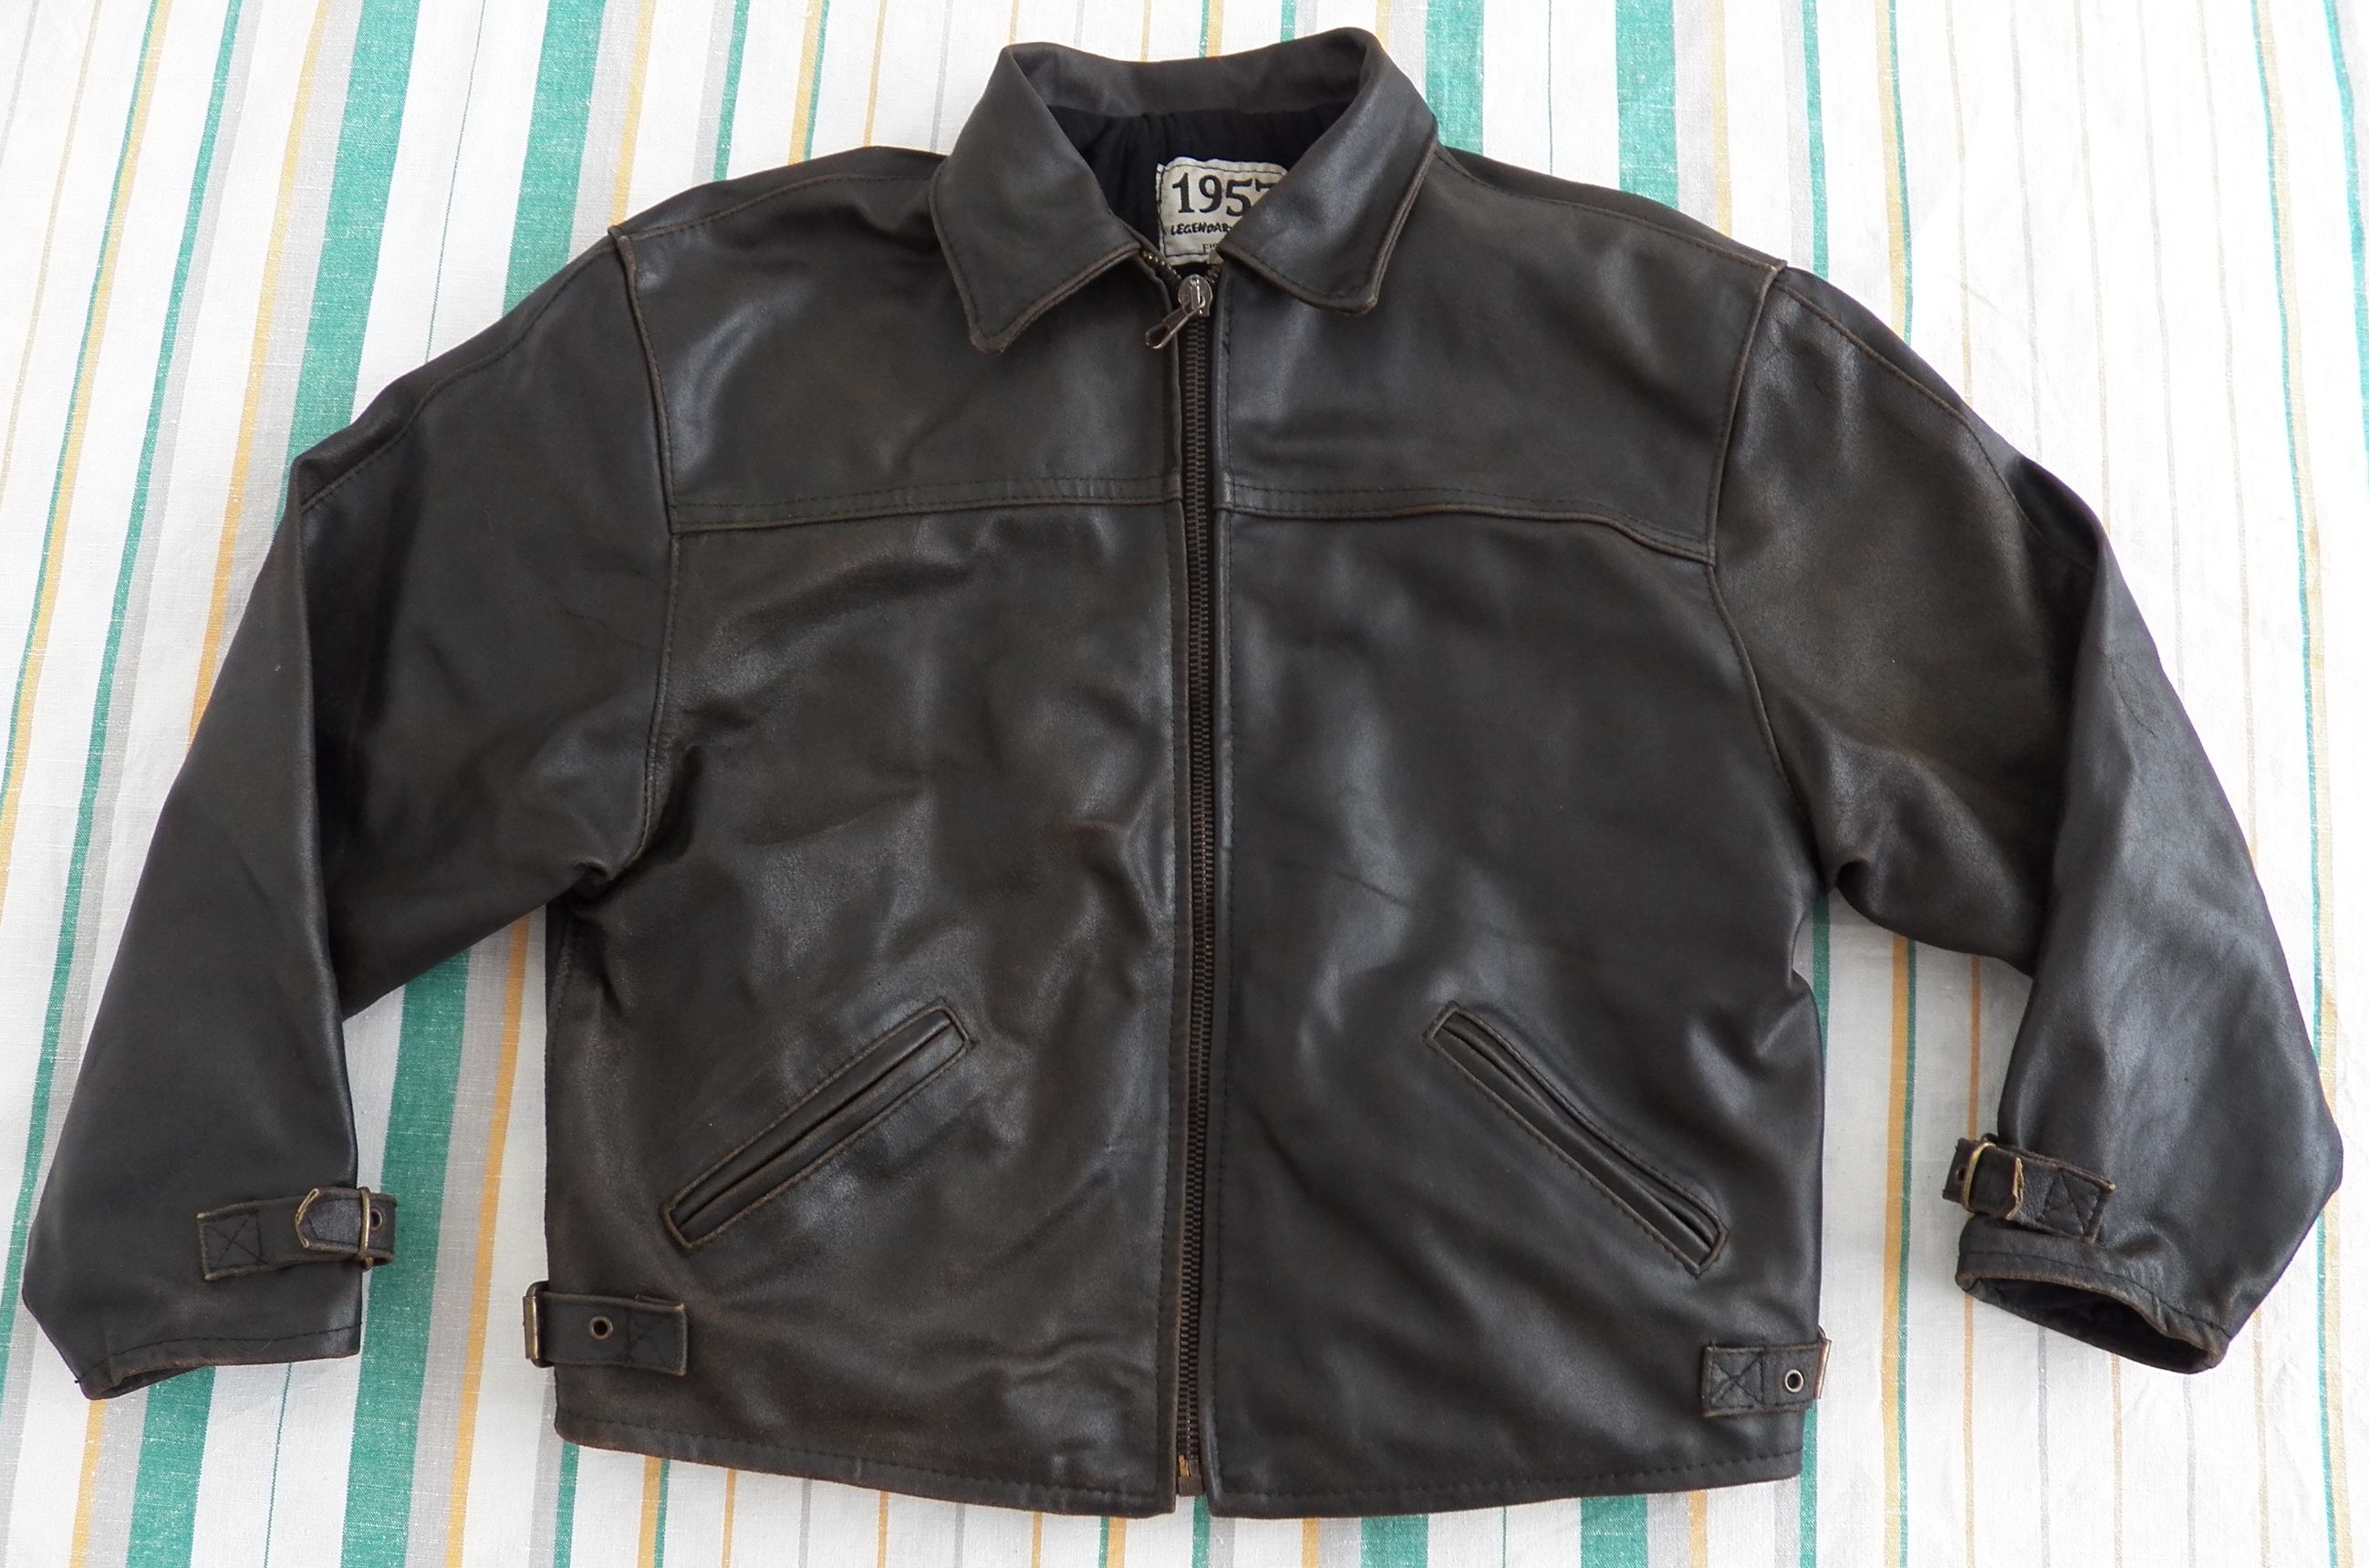 Vintage Firenze 1957 Vintage Raw Leather Jacket Brown Small Size US S / EU 44-46 / 1 - 1 Preview